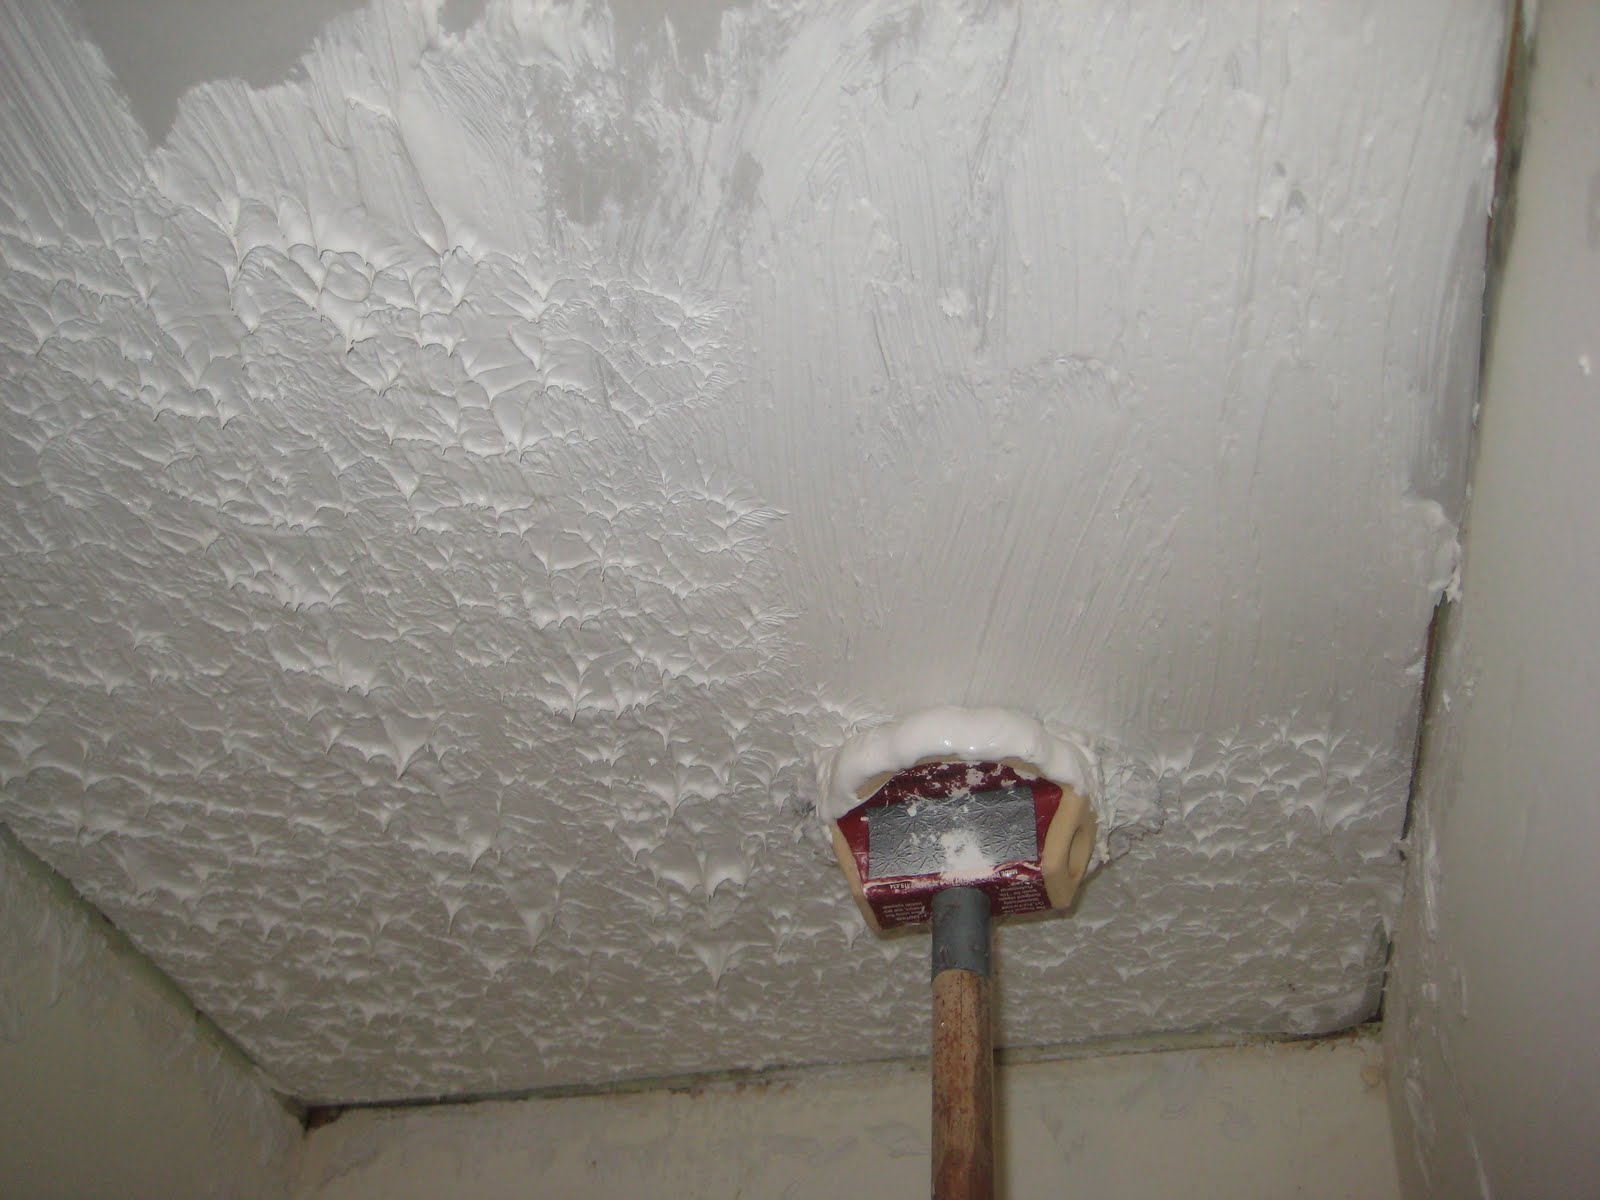 Ways to Stipple Ceiling - How